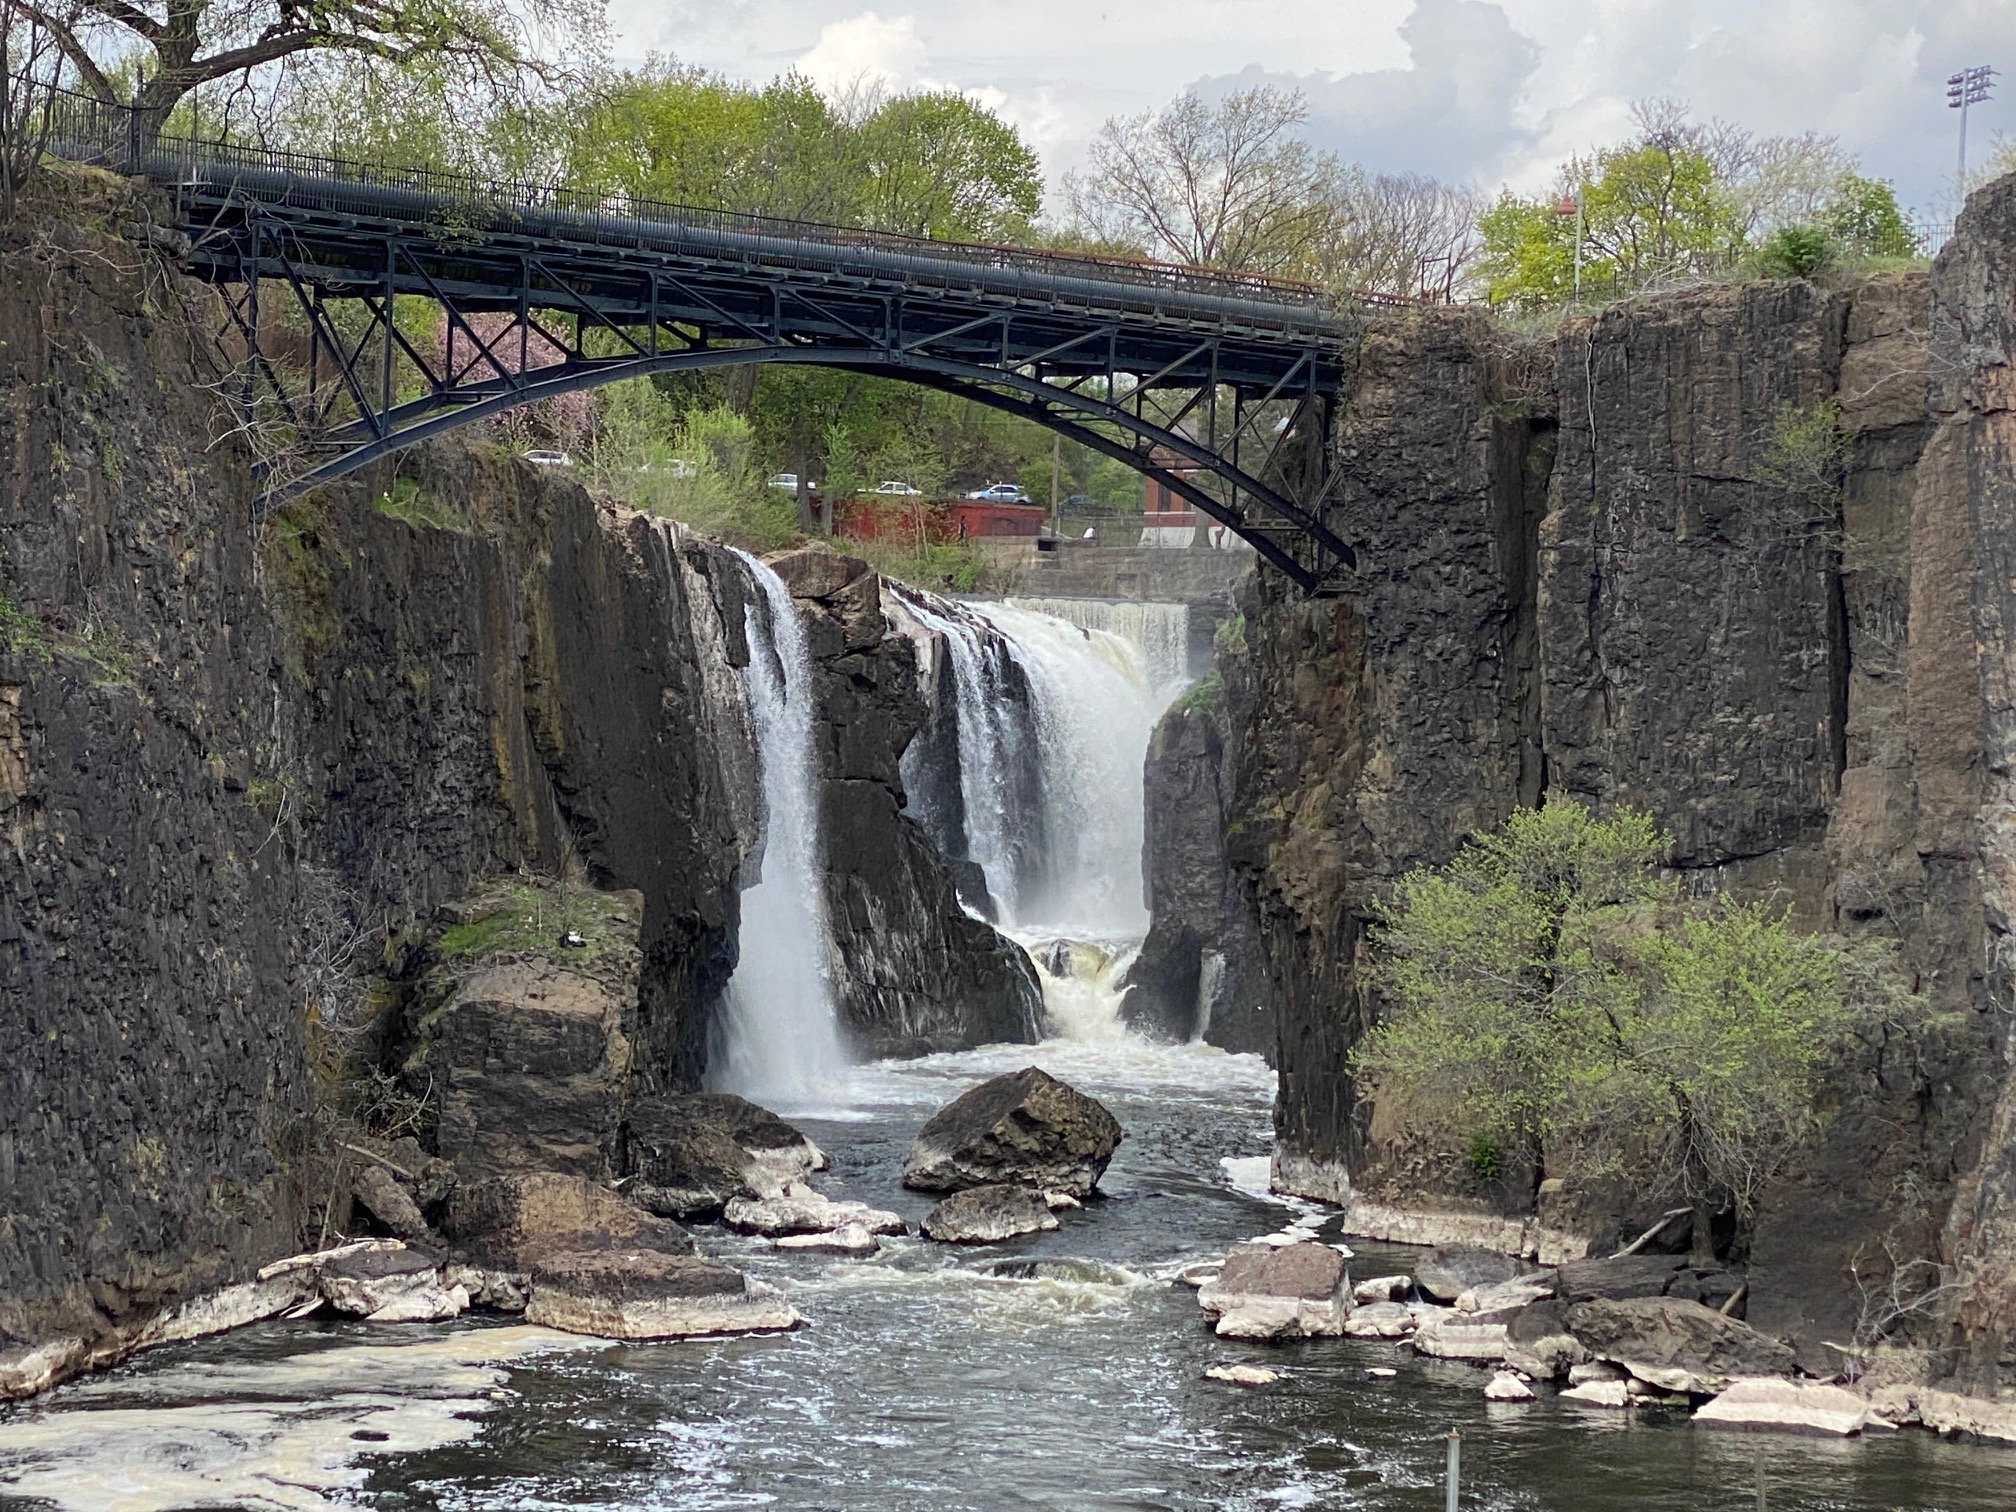 The waterfalls at Great Falls National Park in Paterson, NJ